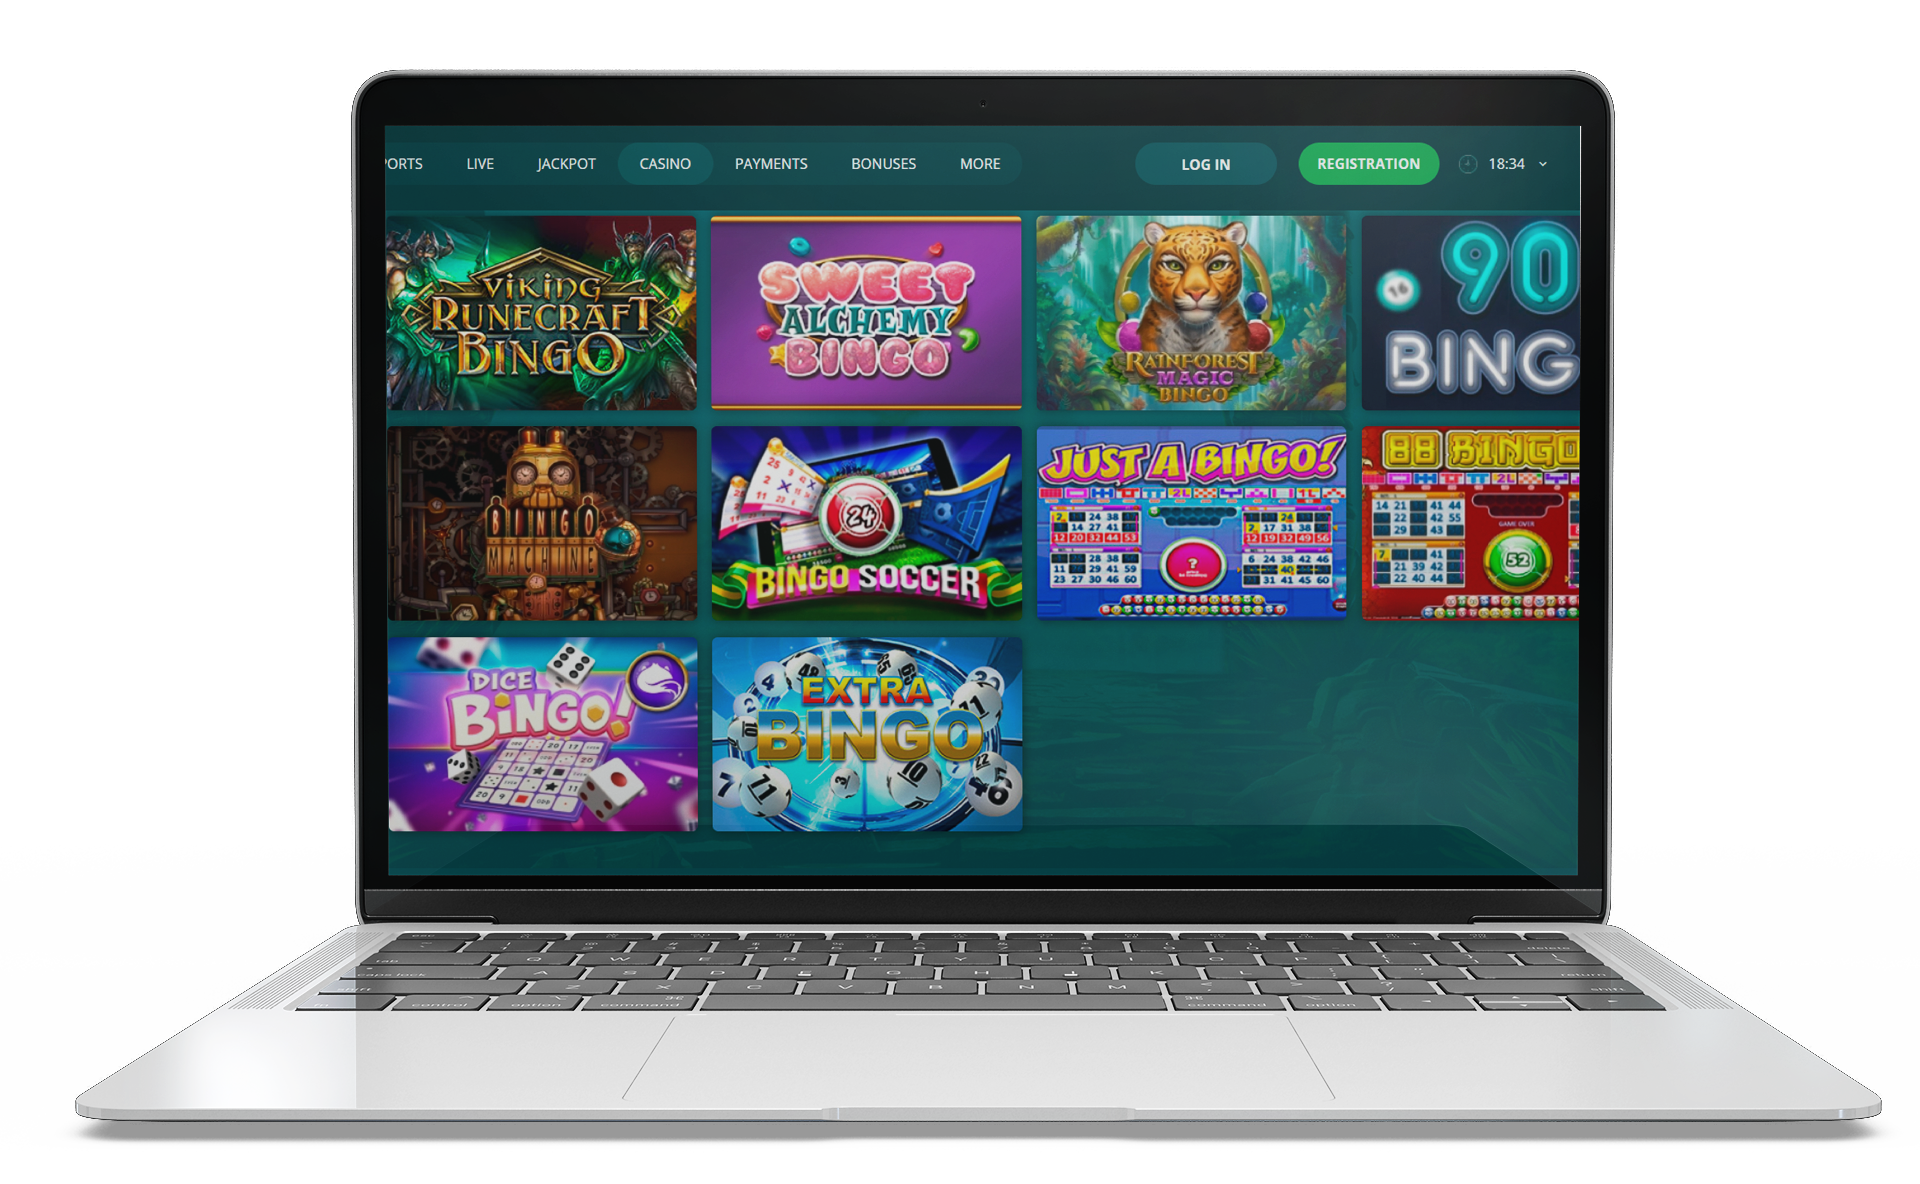 Choose online bingo game, buy a ticket and start playing.